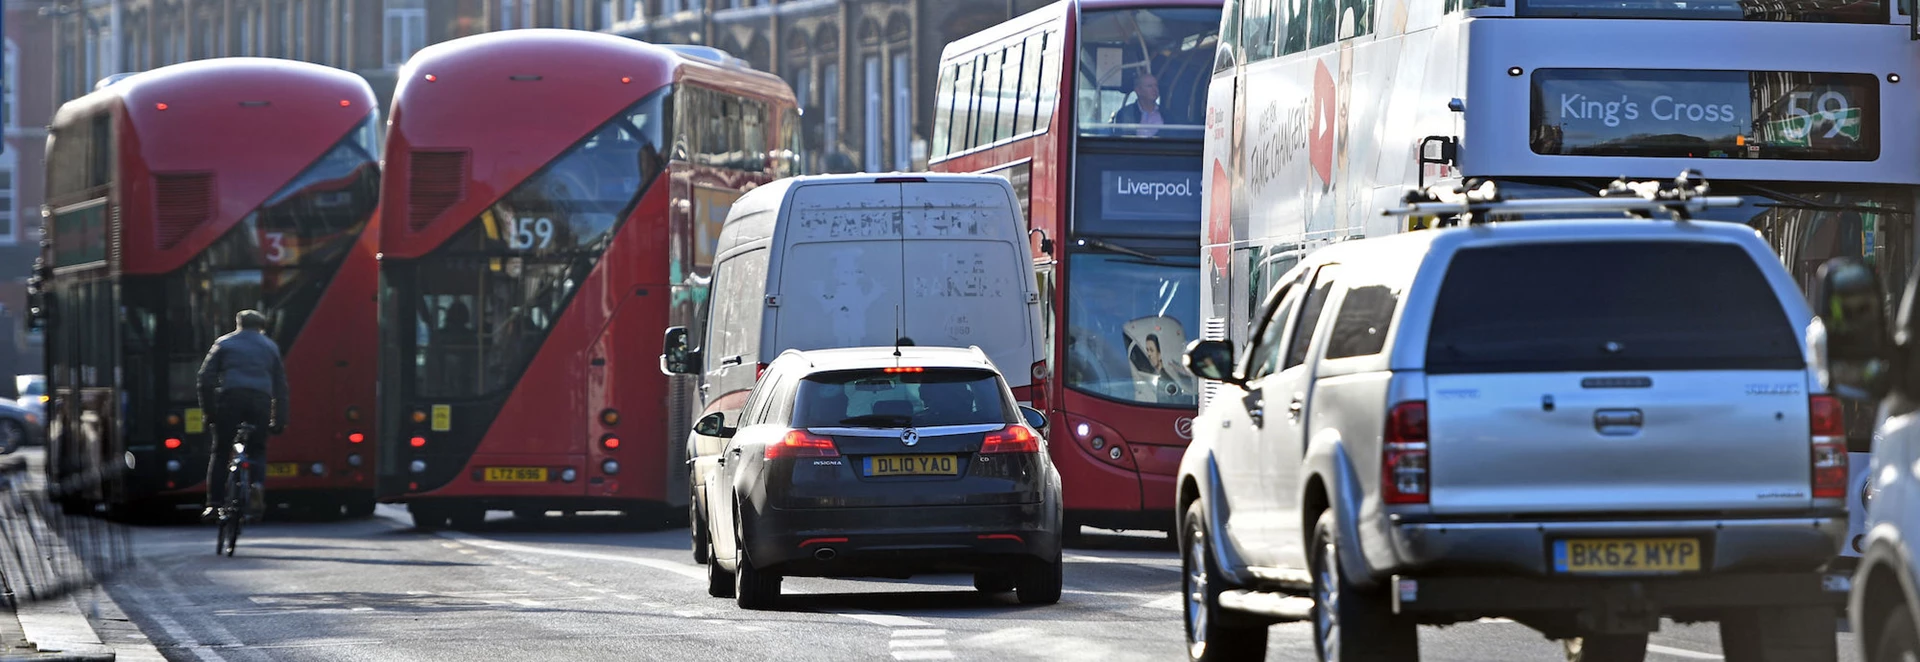 Diesel drivers could be paying £50 daily to drive & park by 2019